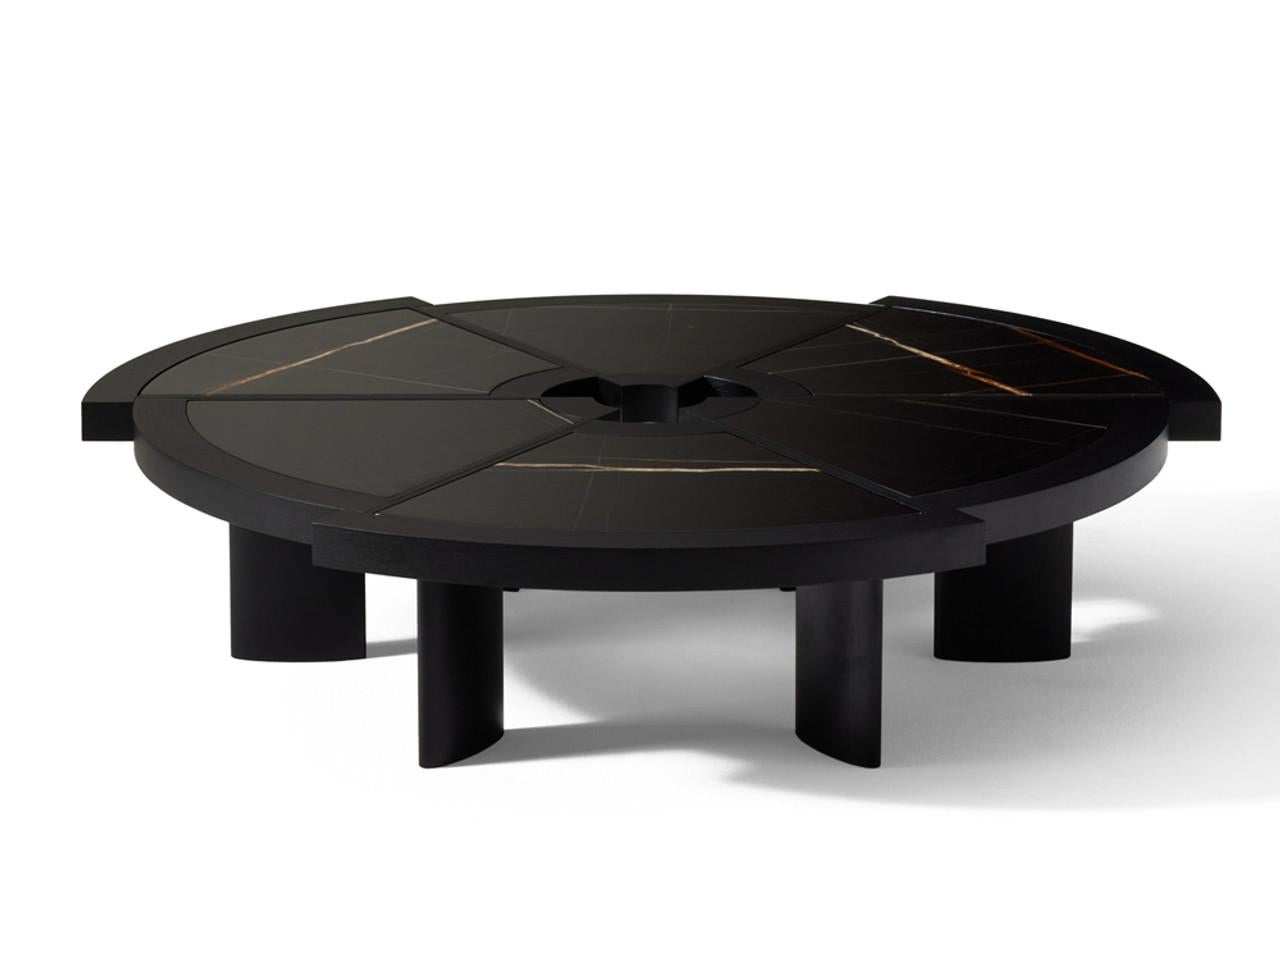 Charlotte Perriand Black Lacquered Wood and Marble Rio Table
Manufactured by Cassina

FUNCTIONALITY AND BEAUTY

The historic Rio design low table combines uncommon beauty and utmost functionality in an asymmetrical structure that, over time, has